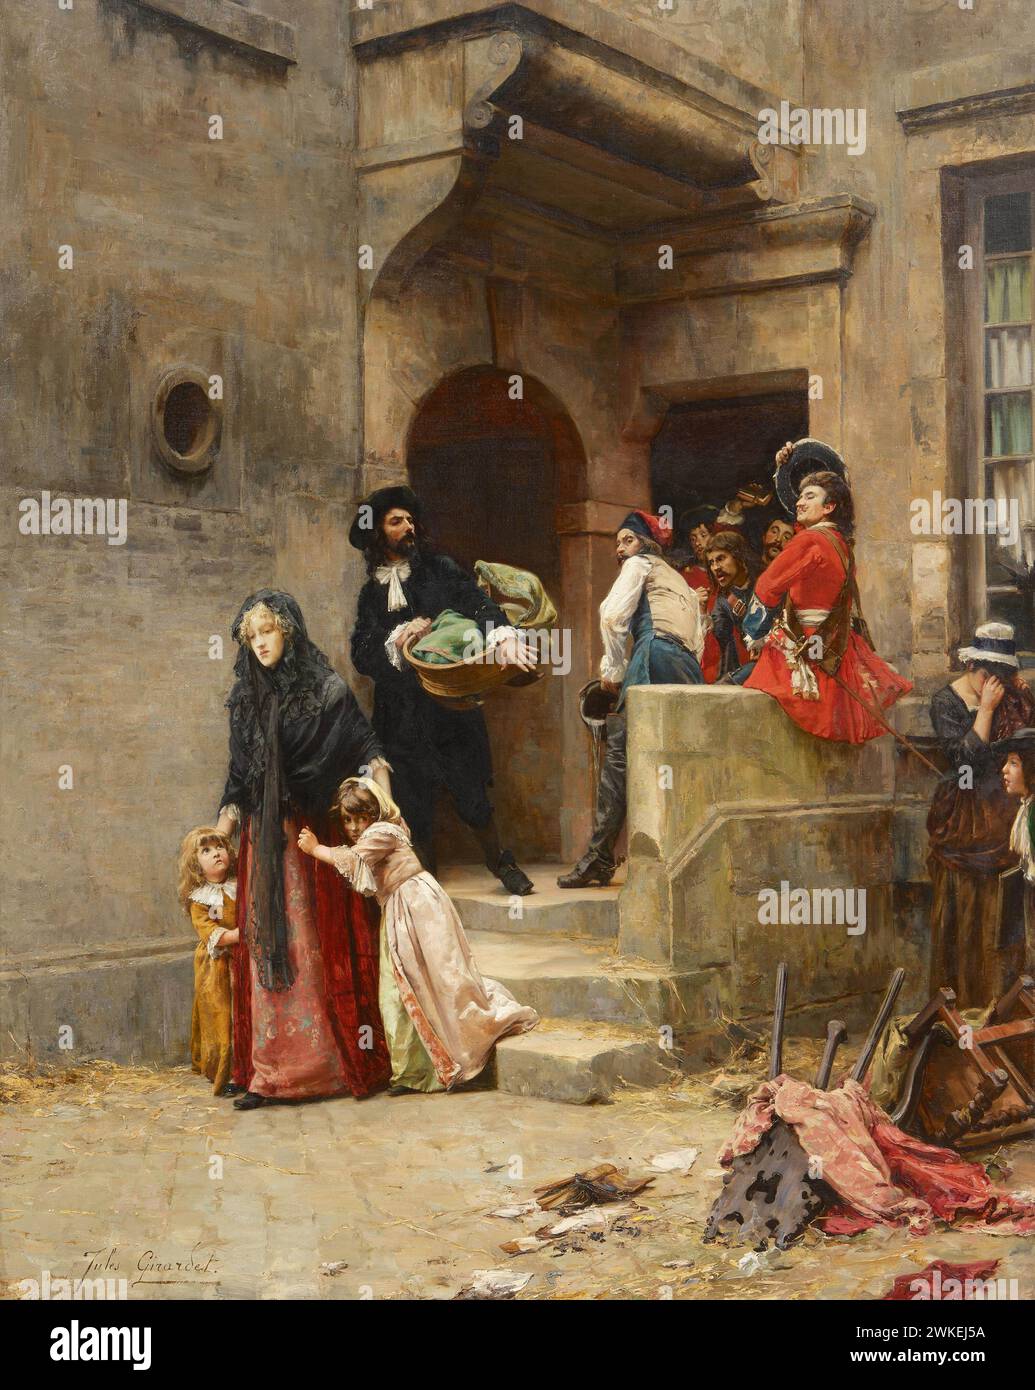 Scene from the Dragonnades. Museum: PRIVATE COLLECTION. Author: JULES GIRARDET. Stock Photo